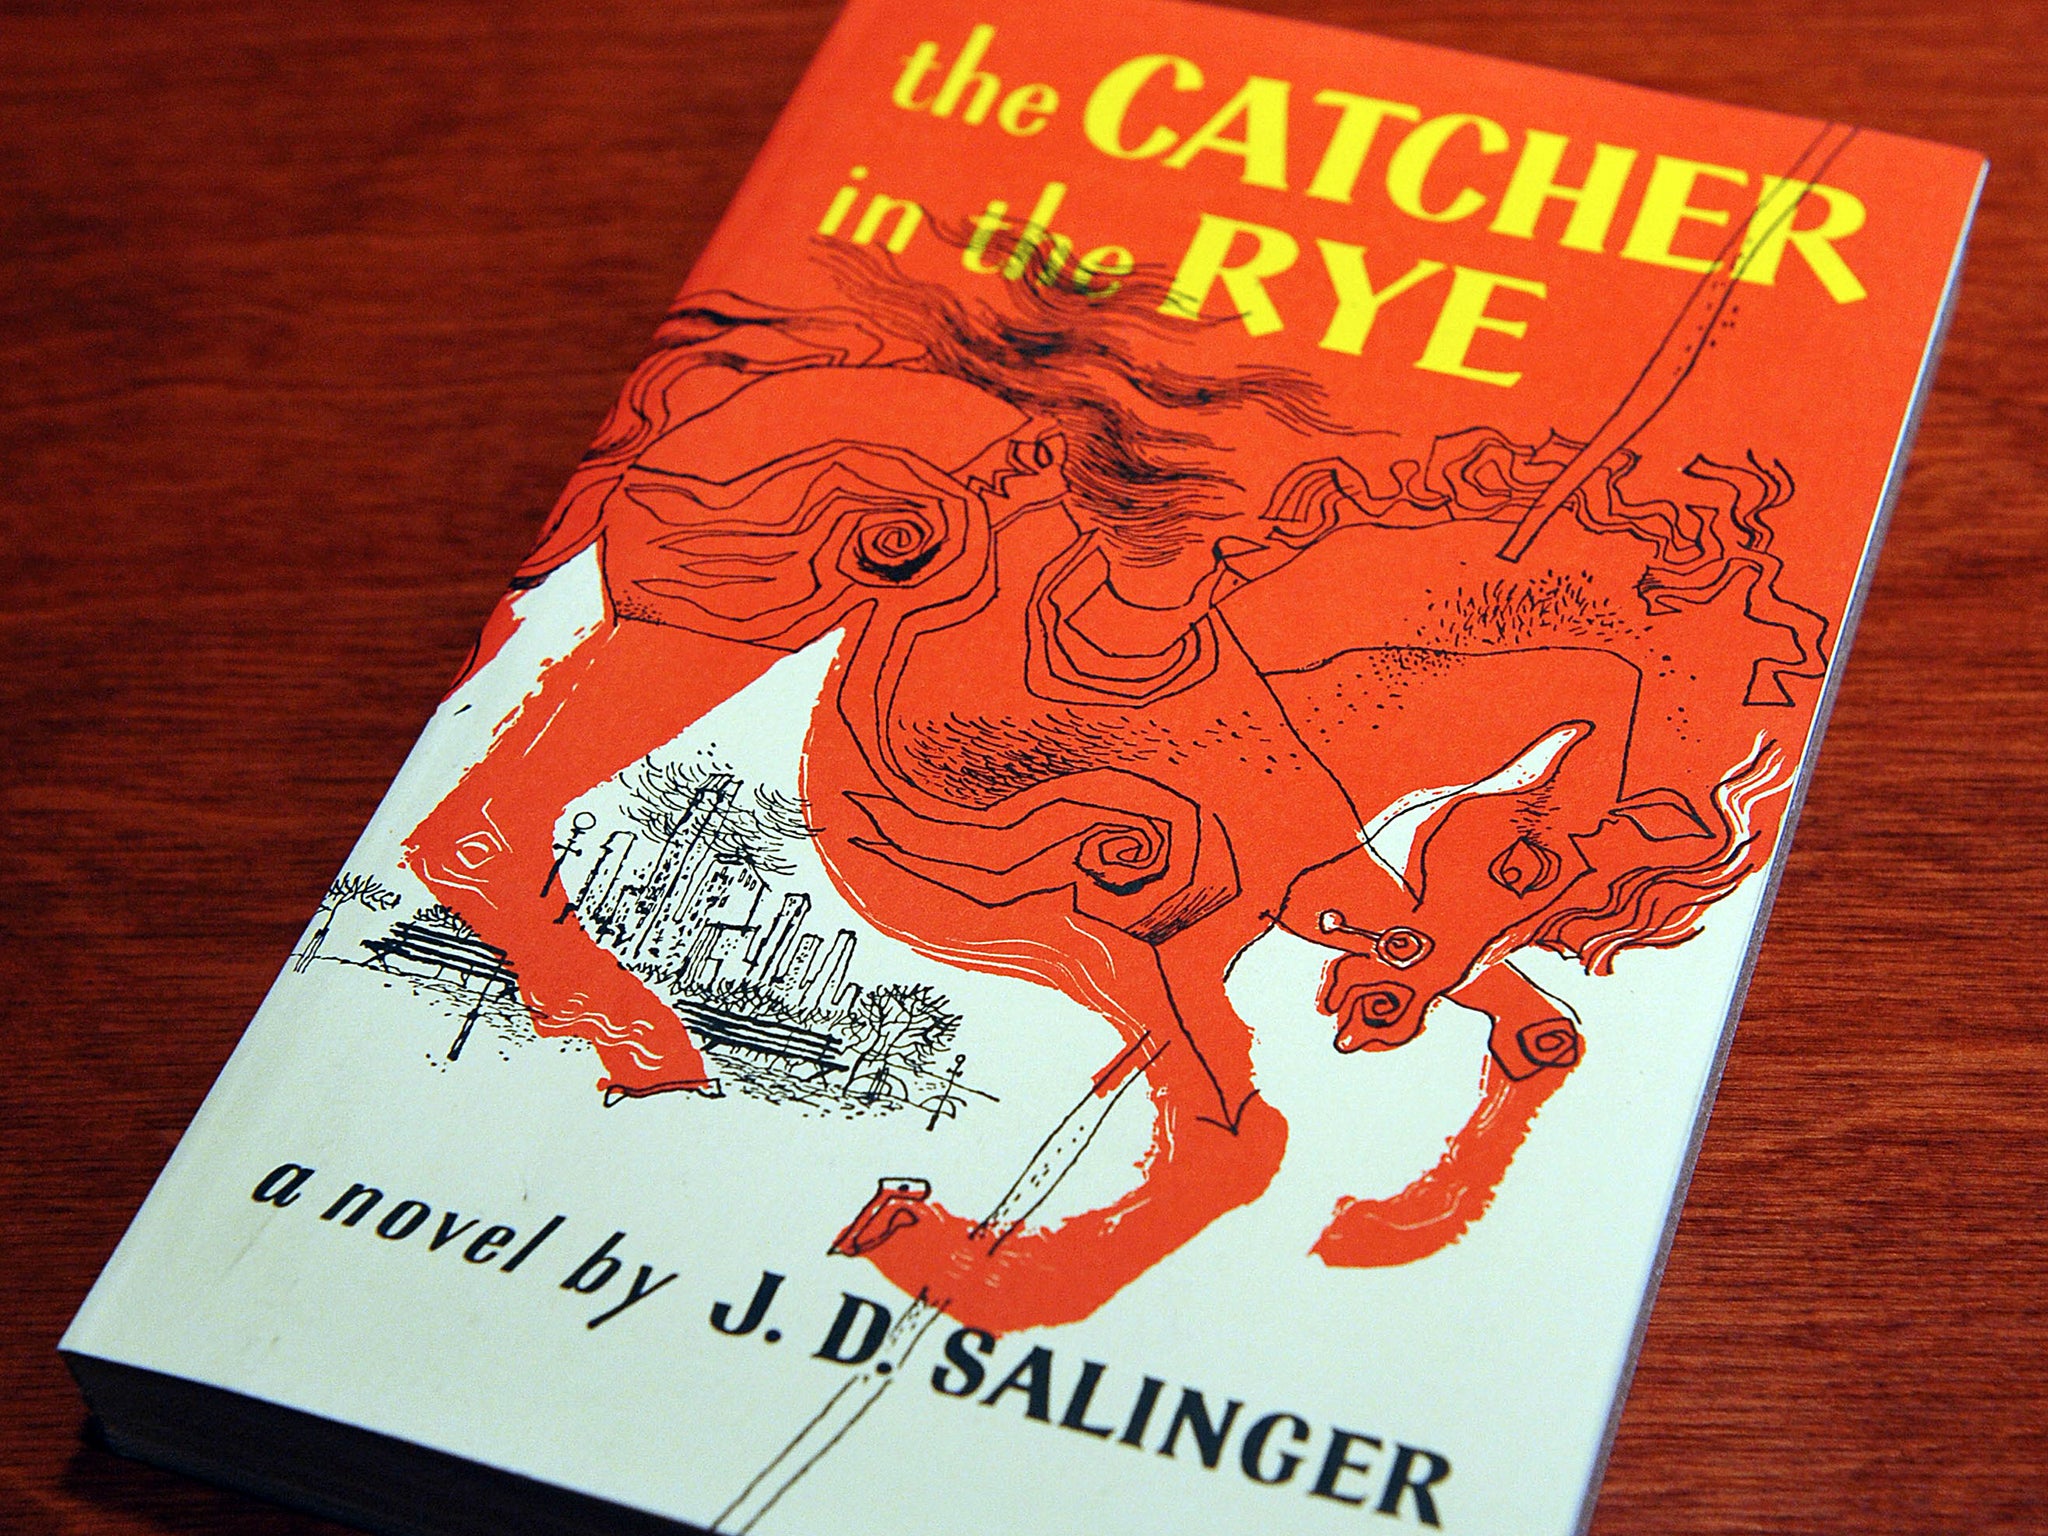 is the catcher in the rye good